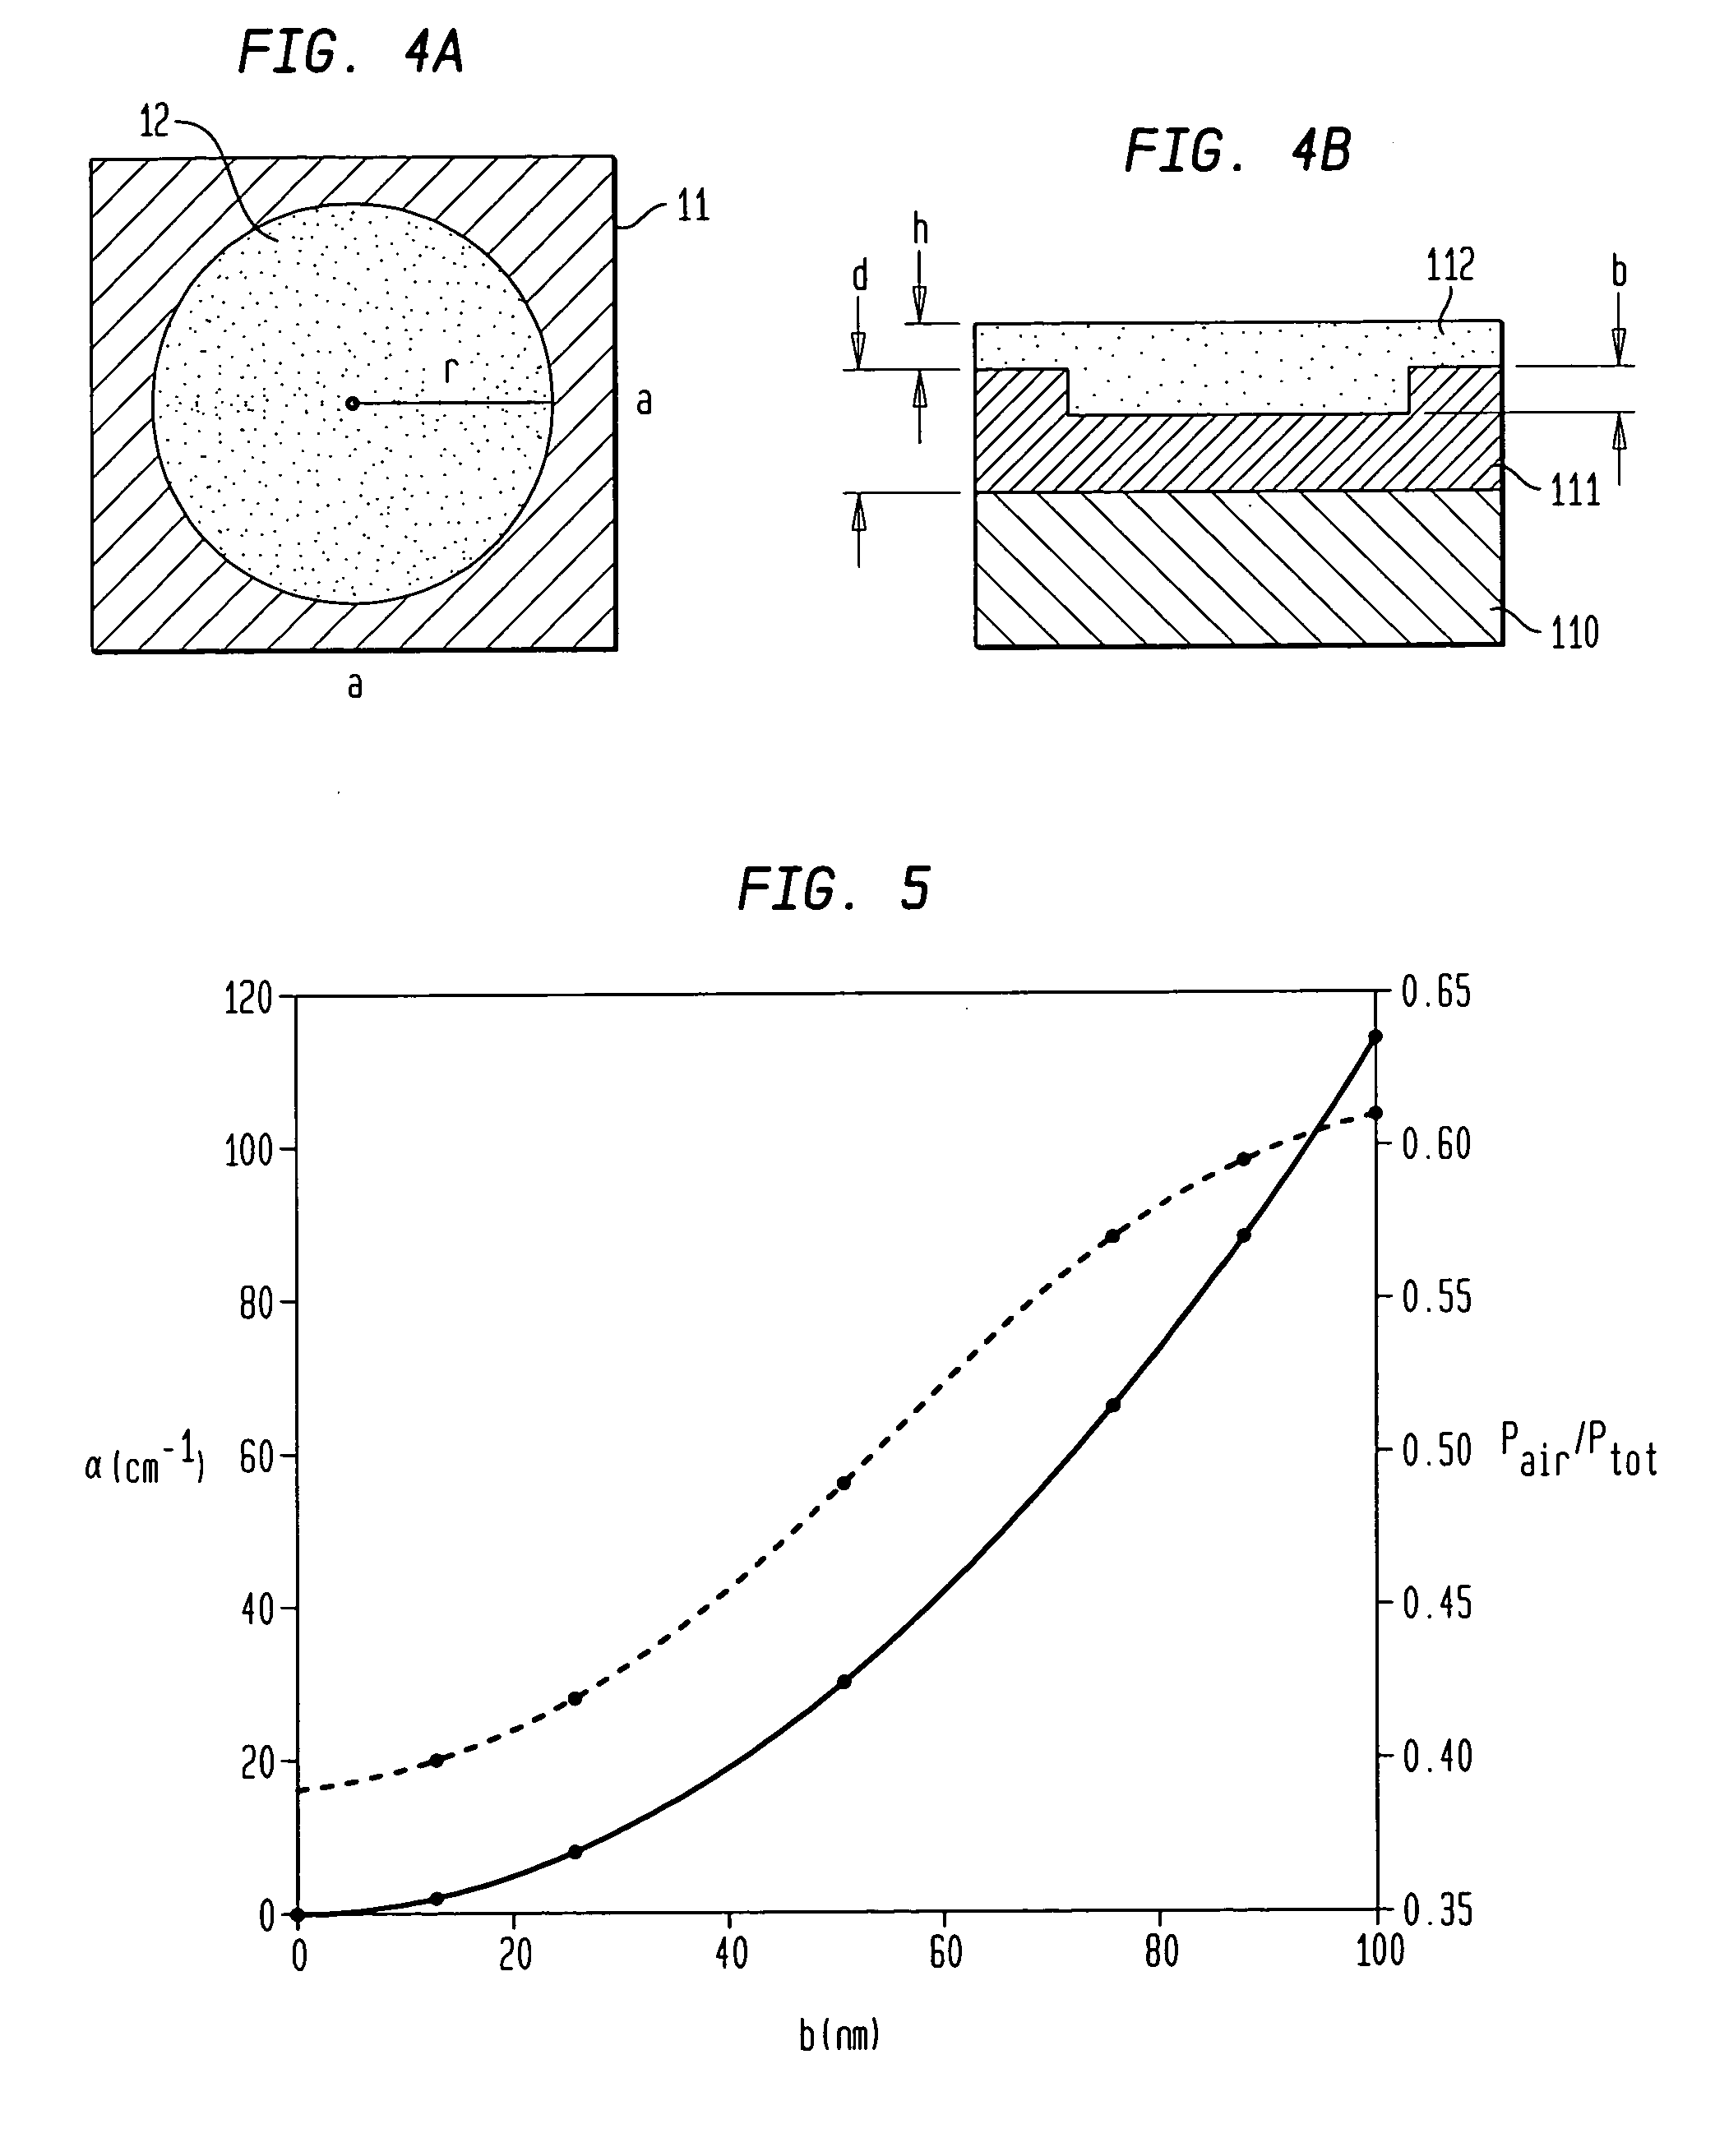 Article comprising a two-dimensional photonic crystal coupler and method of making the same